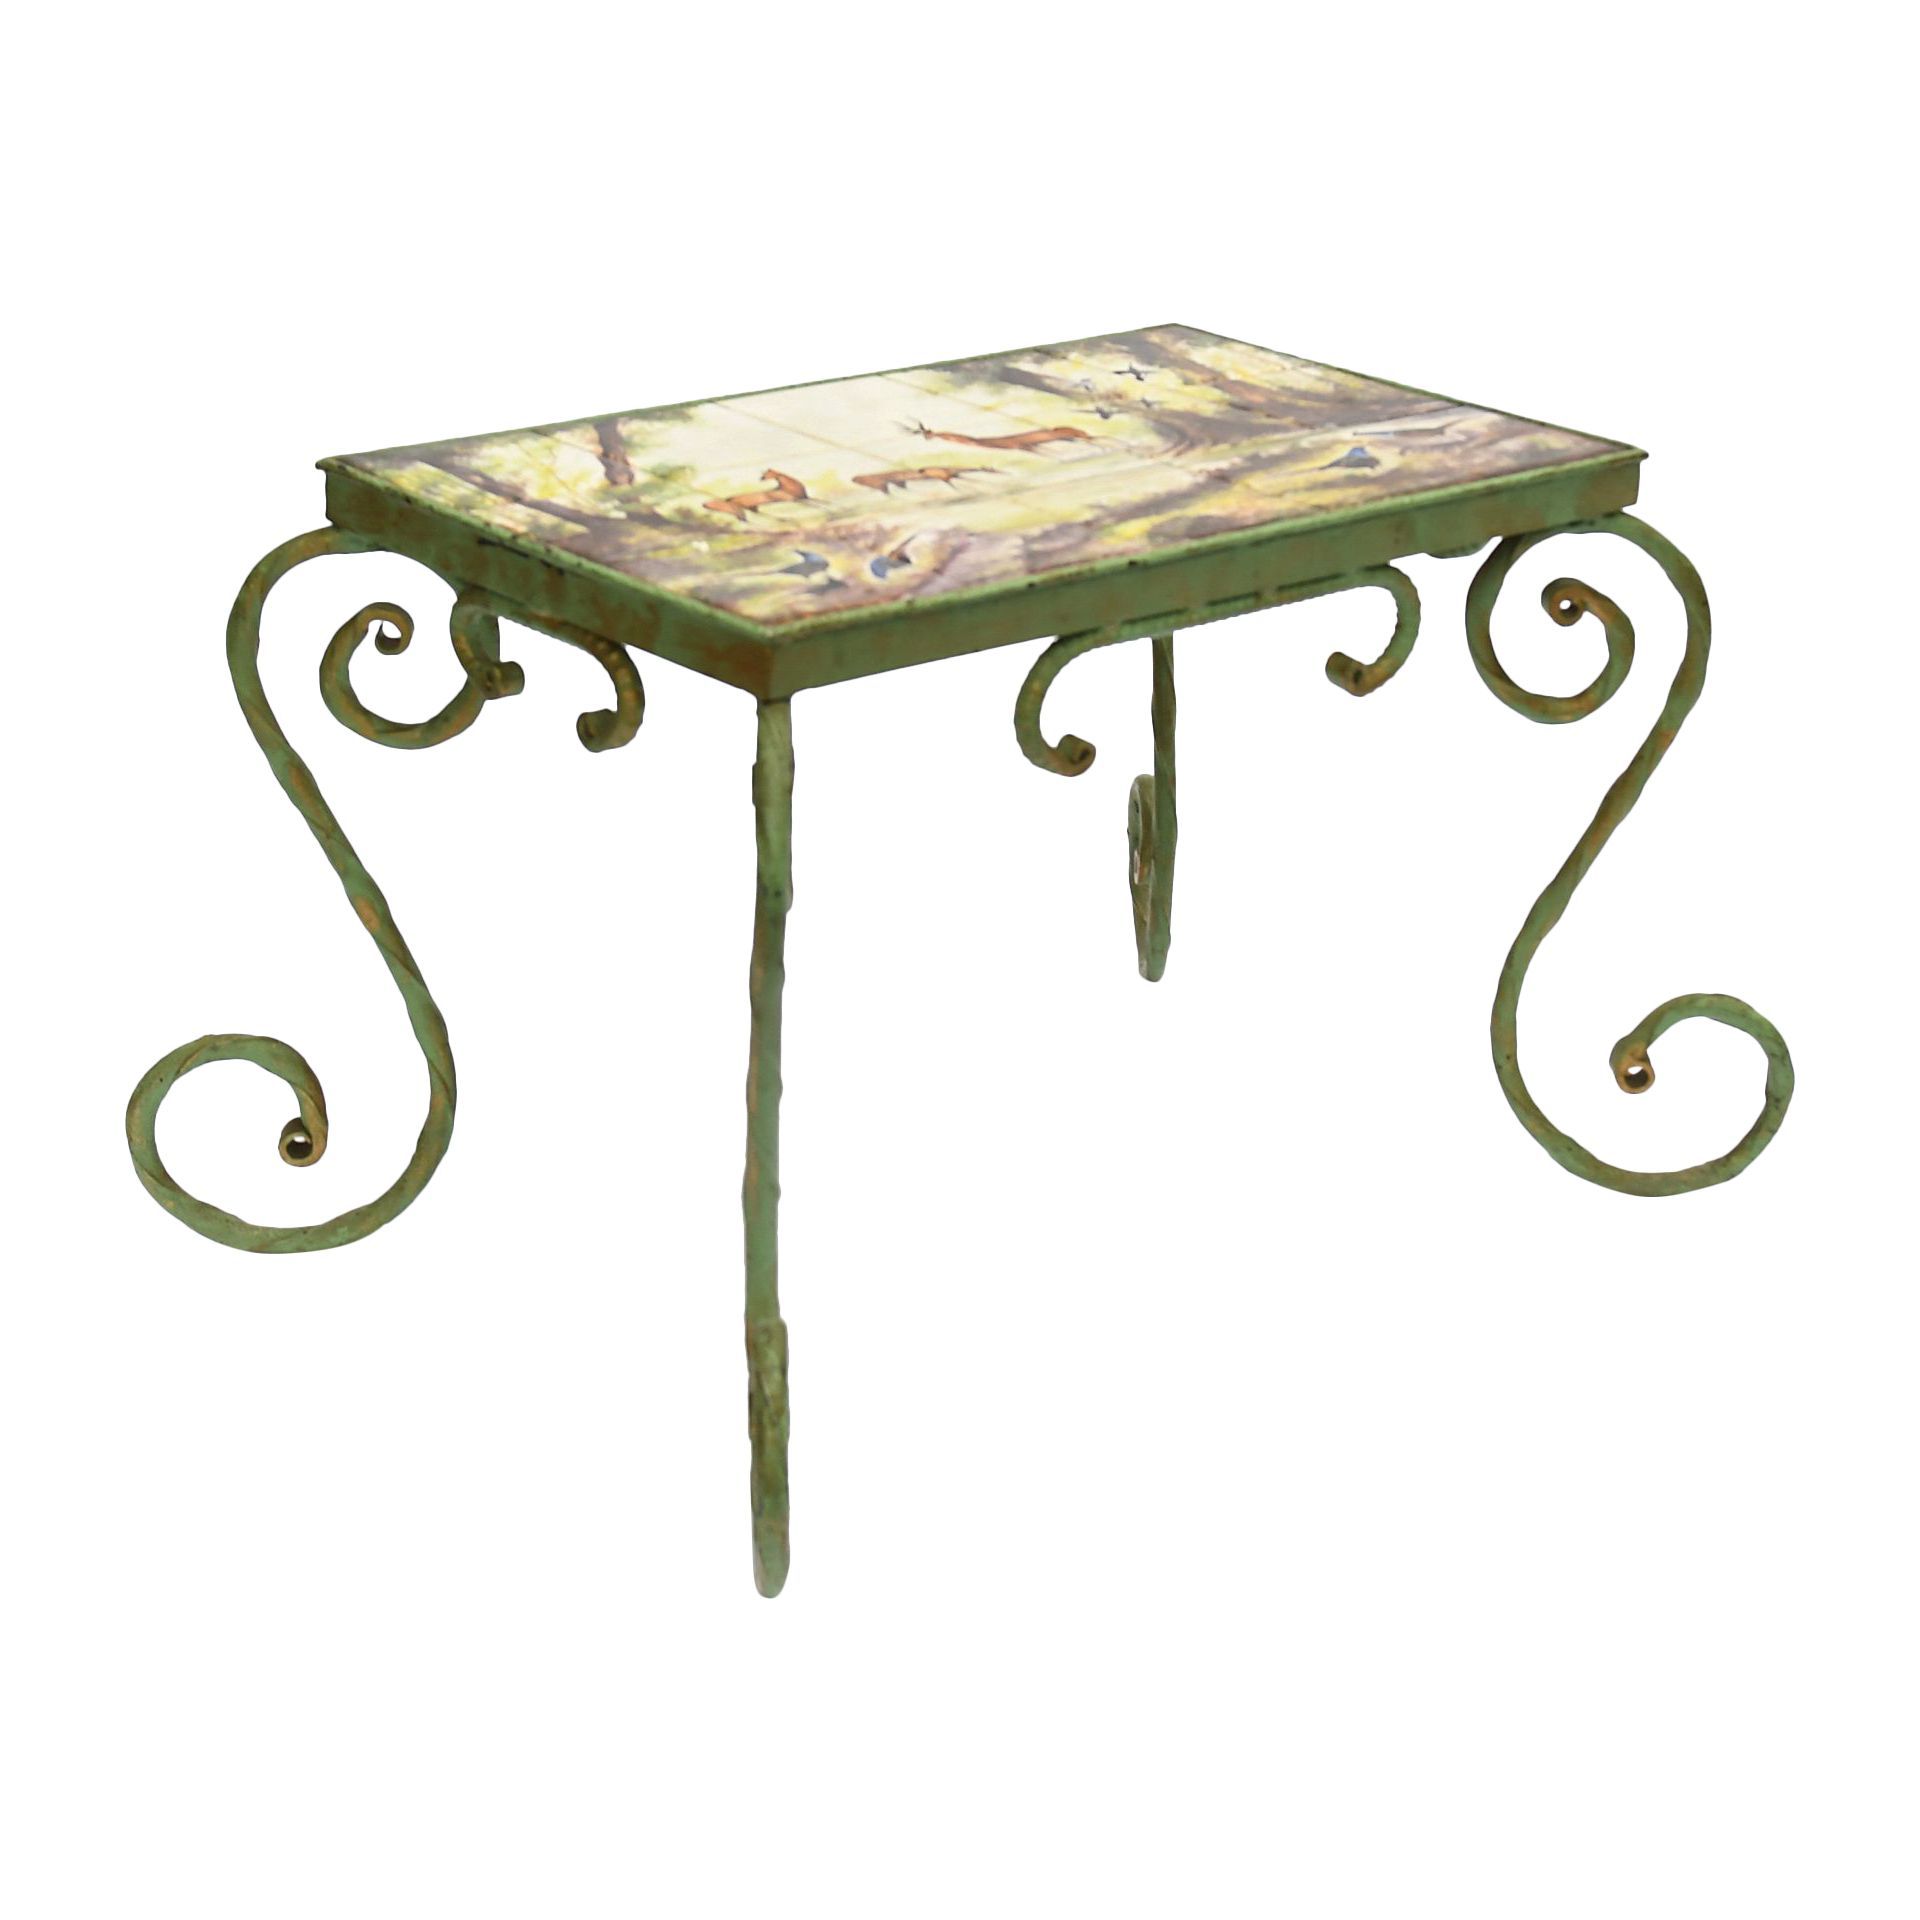 Wrought Iron Coffee Table With Ceramic Tile Top – Coffee Tables | Antikeo With Iron Coffee Tables (View 7 of 20)